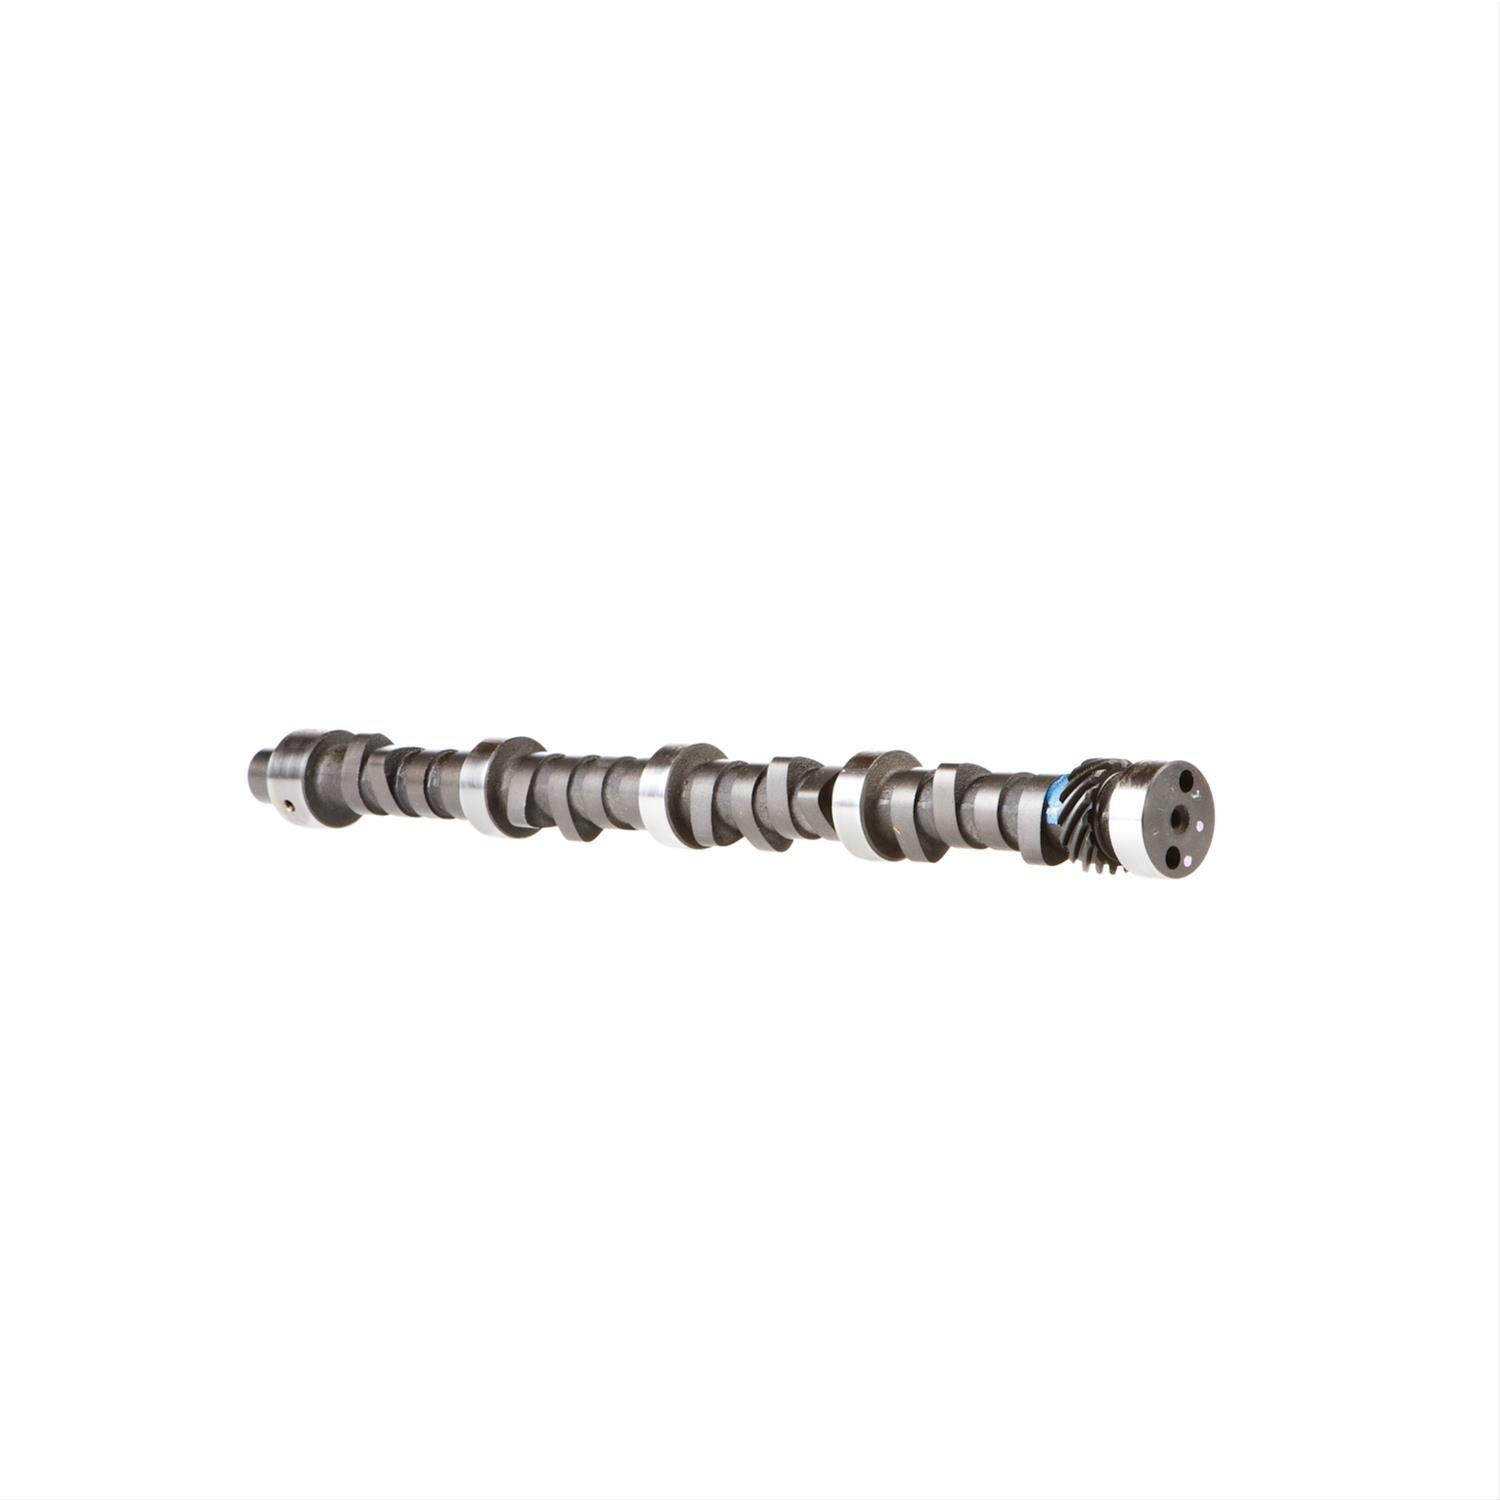 CCS-4 Stock Replacement Camshaft